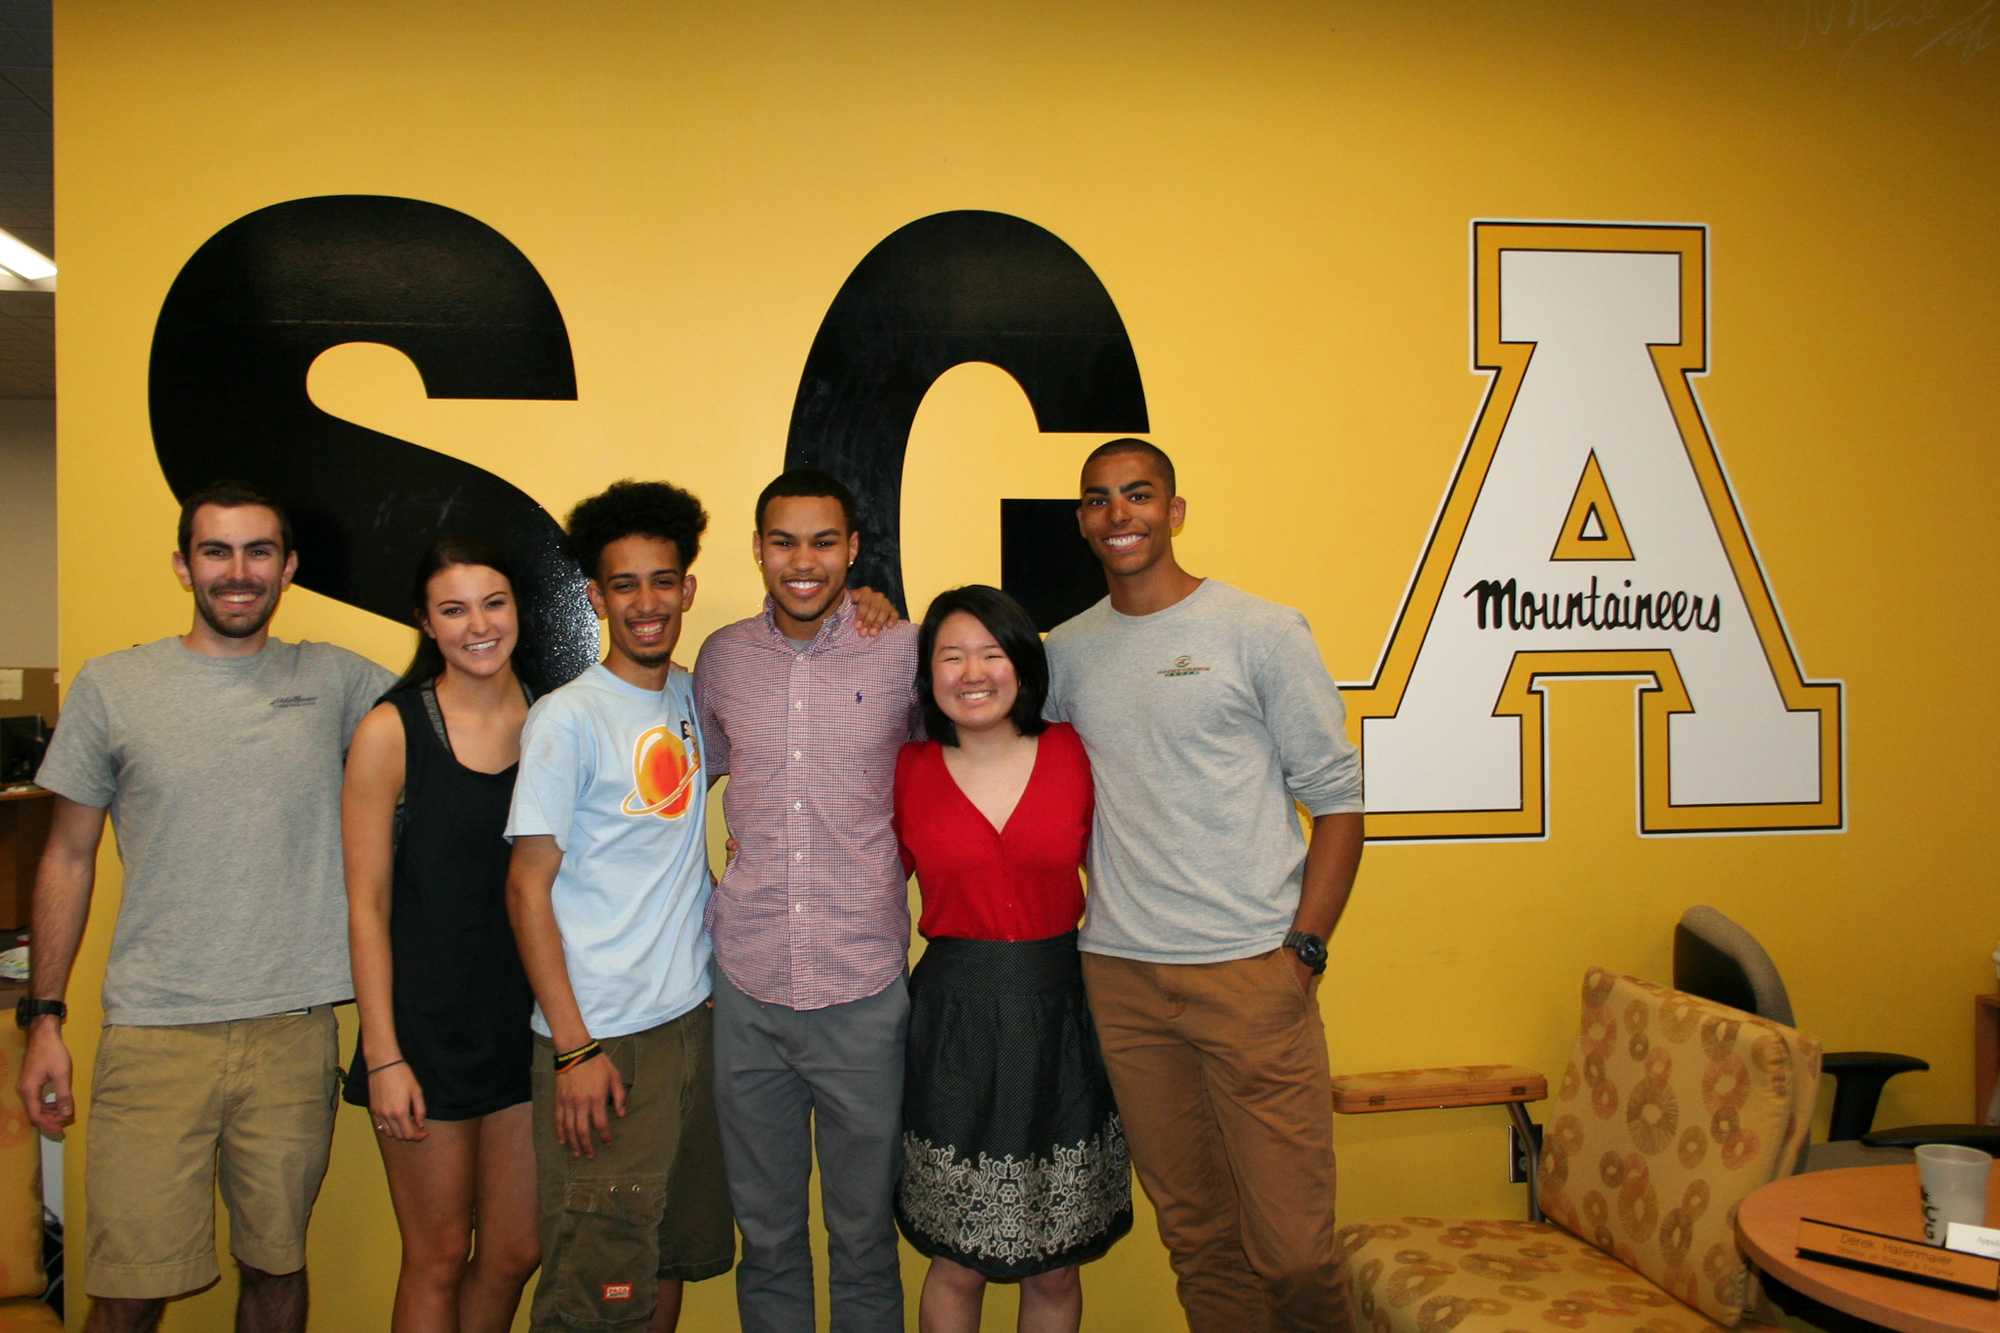 Winners Howard/Dawson and their campaign team stand in the SGA office after the announcement was made. Howard/Dawson got 1,421 votes (54.1%).